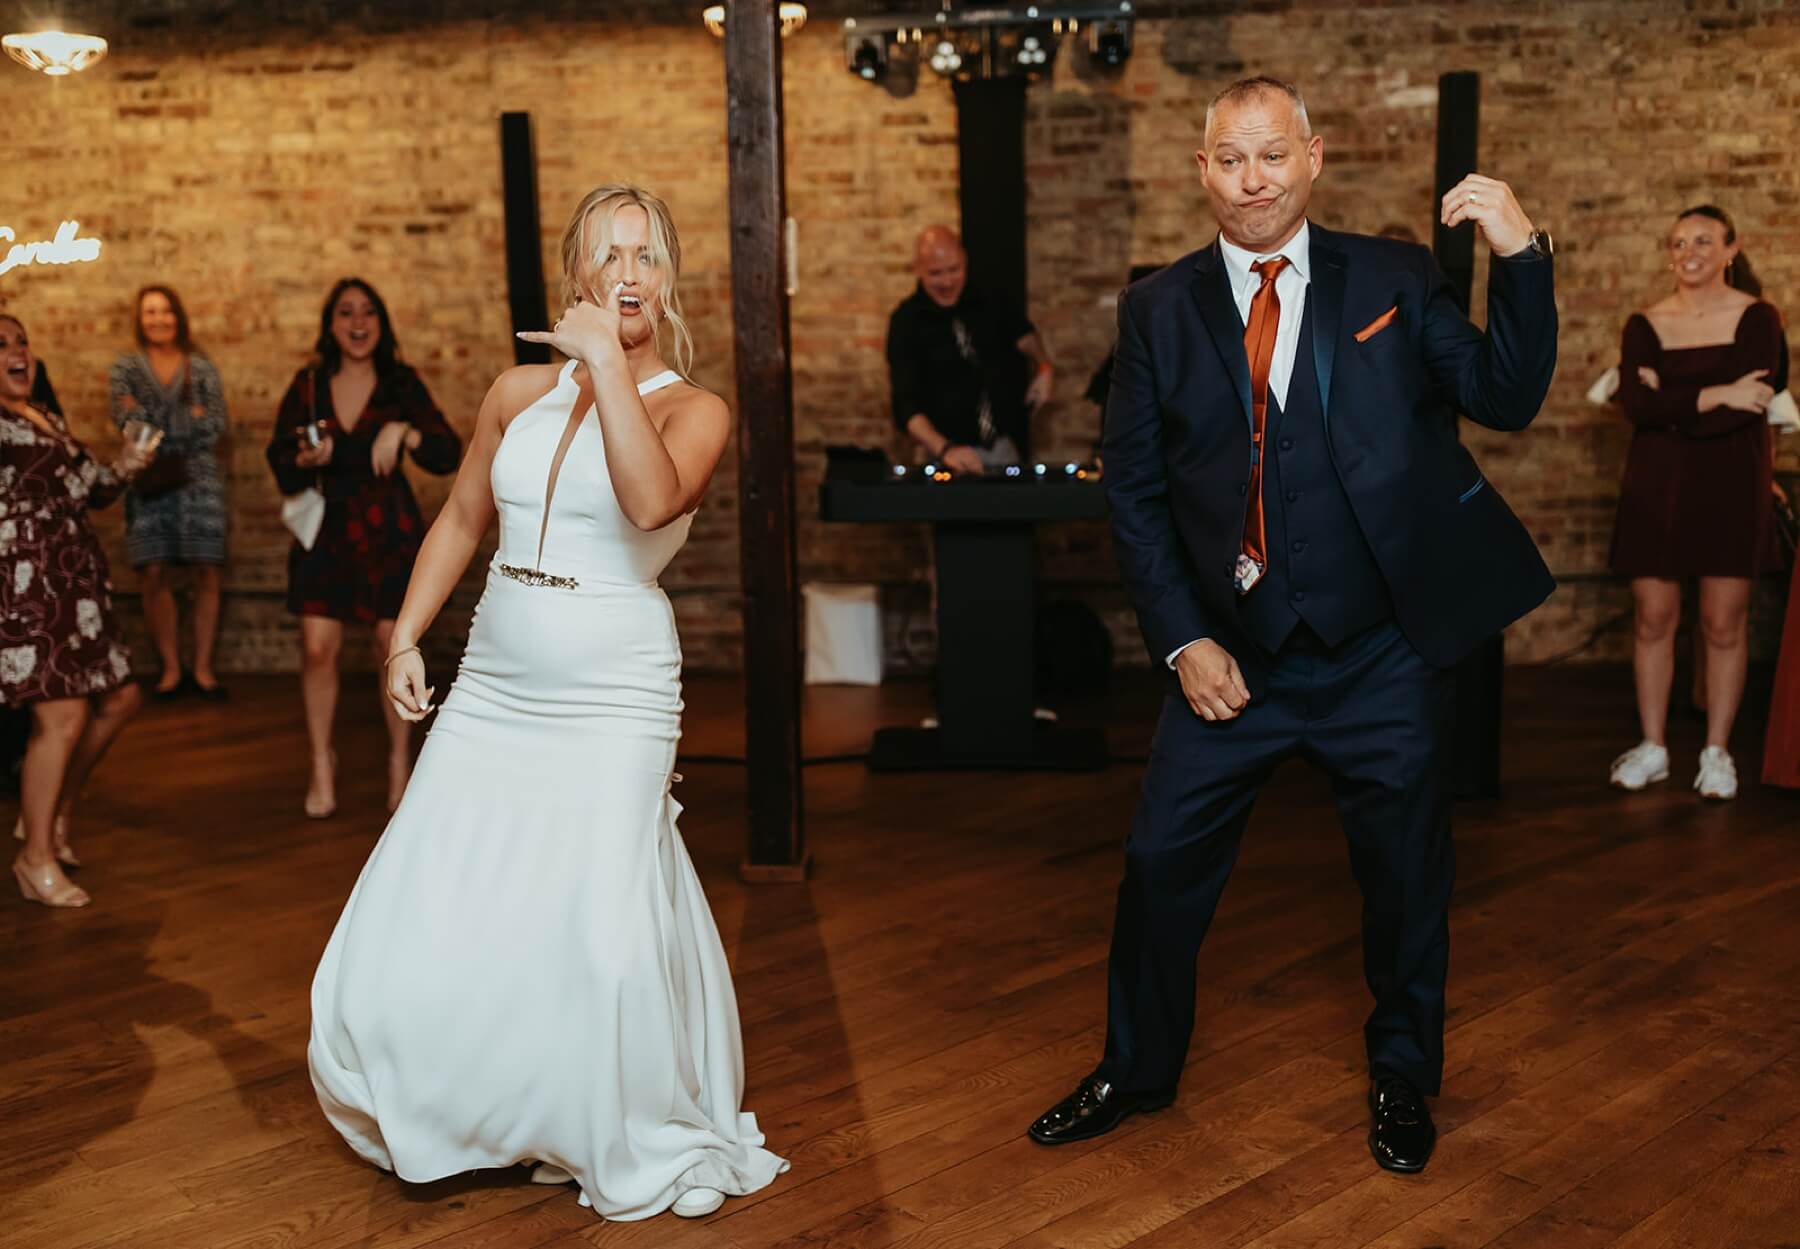 Bride and dad doing choreographed dance